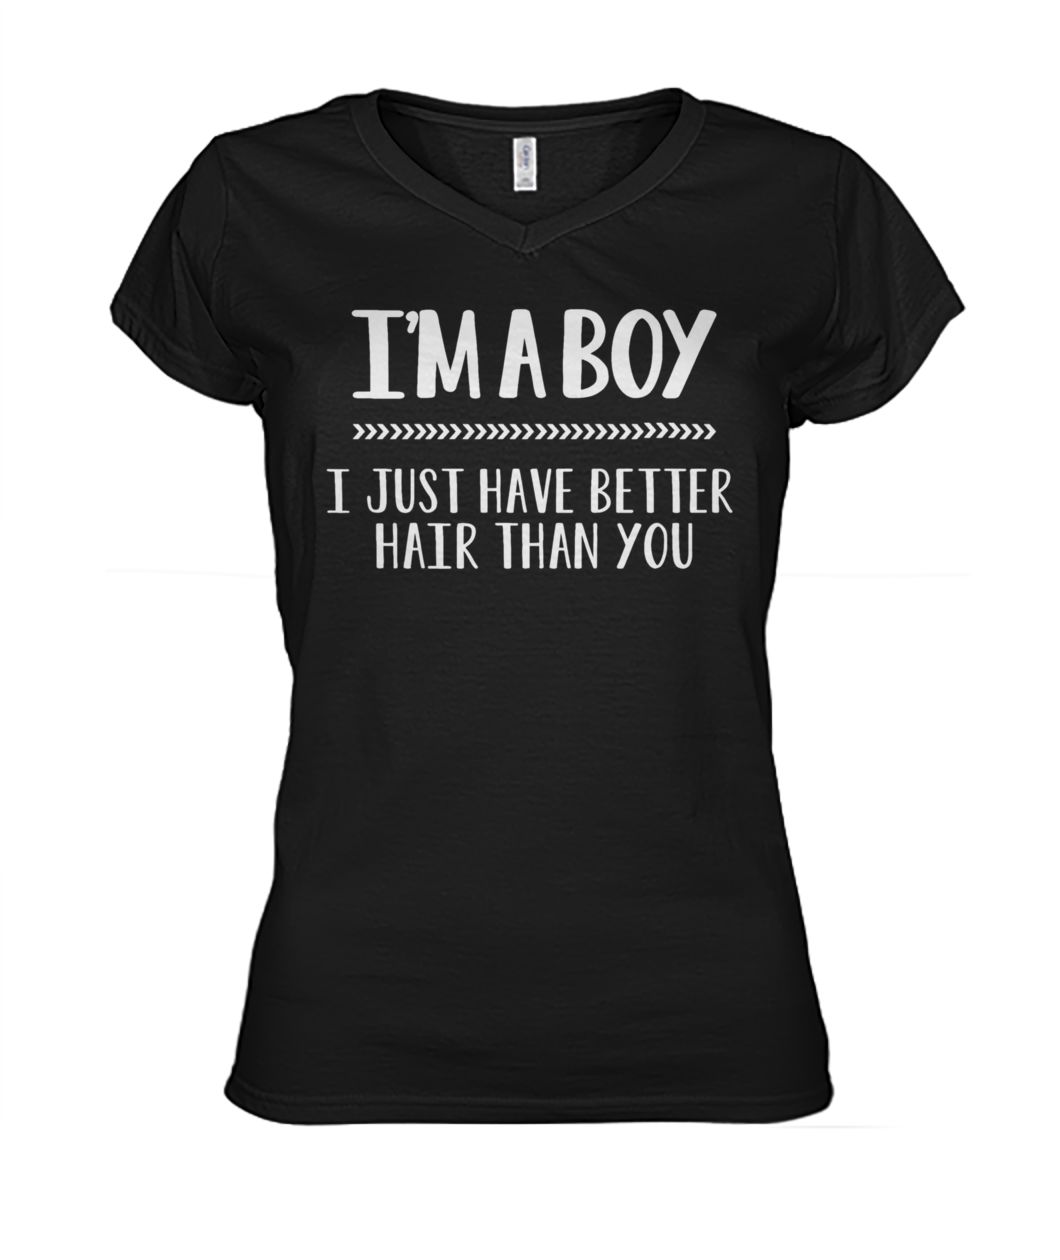 I'm a boy I just have better hair than you women's v-neck